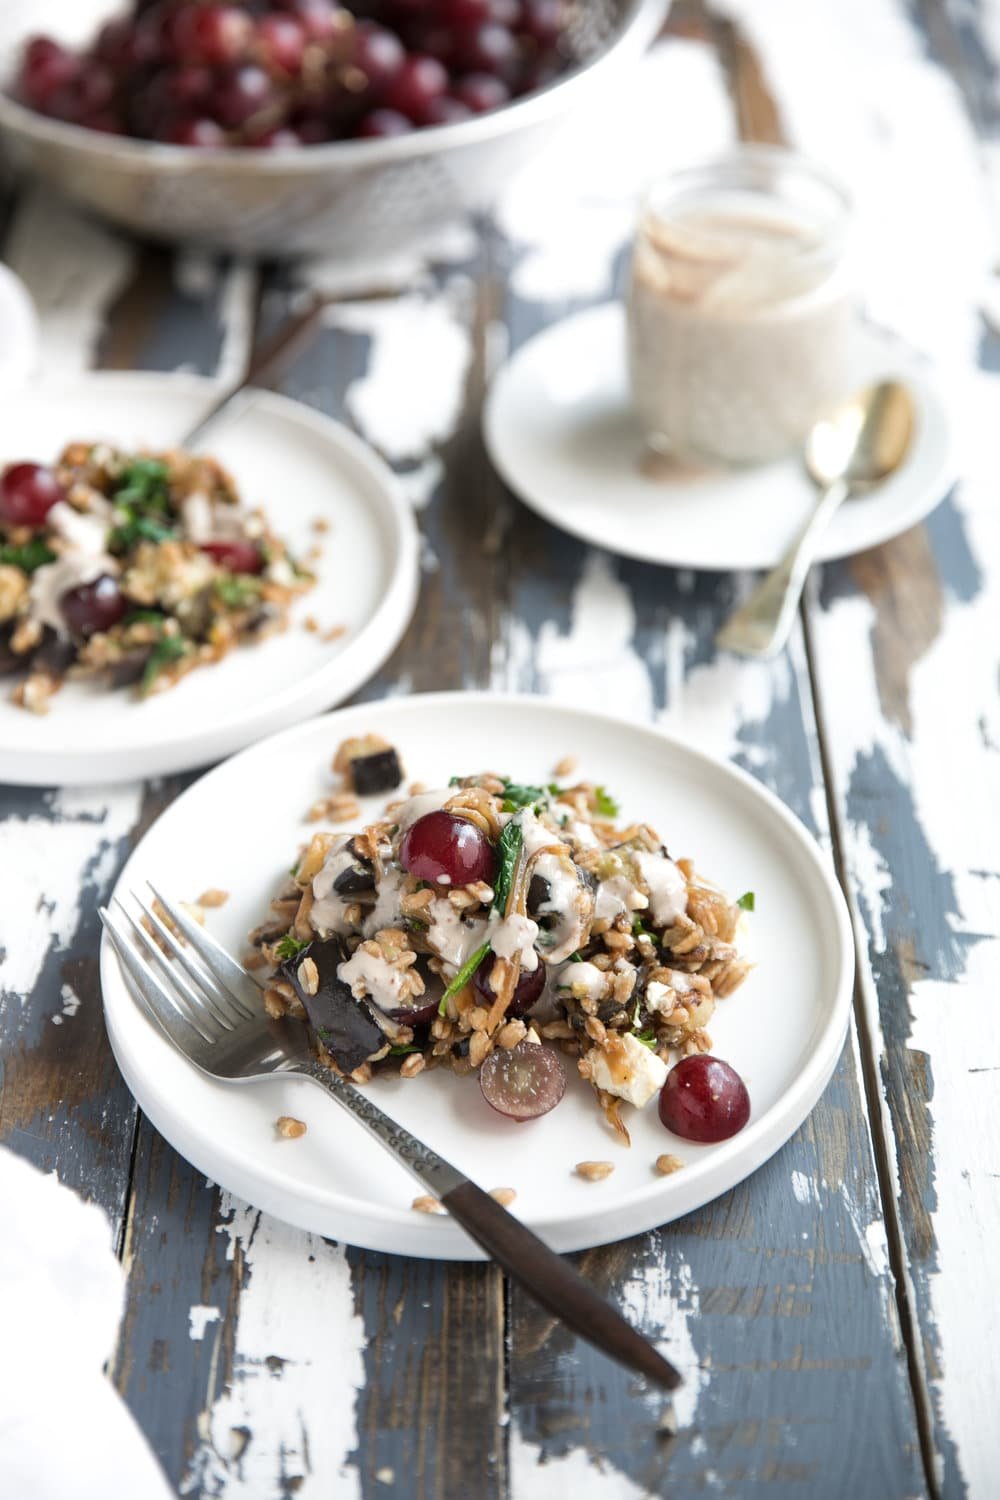 Serving plates with farro salad mixed with roasted eggplant, caramelized onions, grapes, feta cheese, and drizzled with walnut dijon dressing.